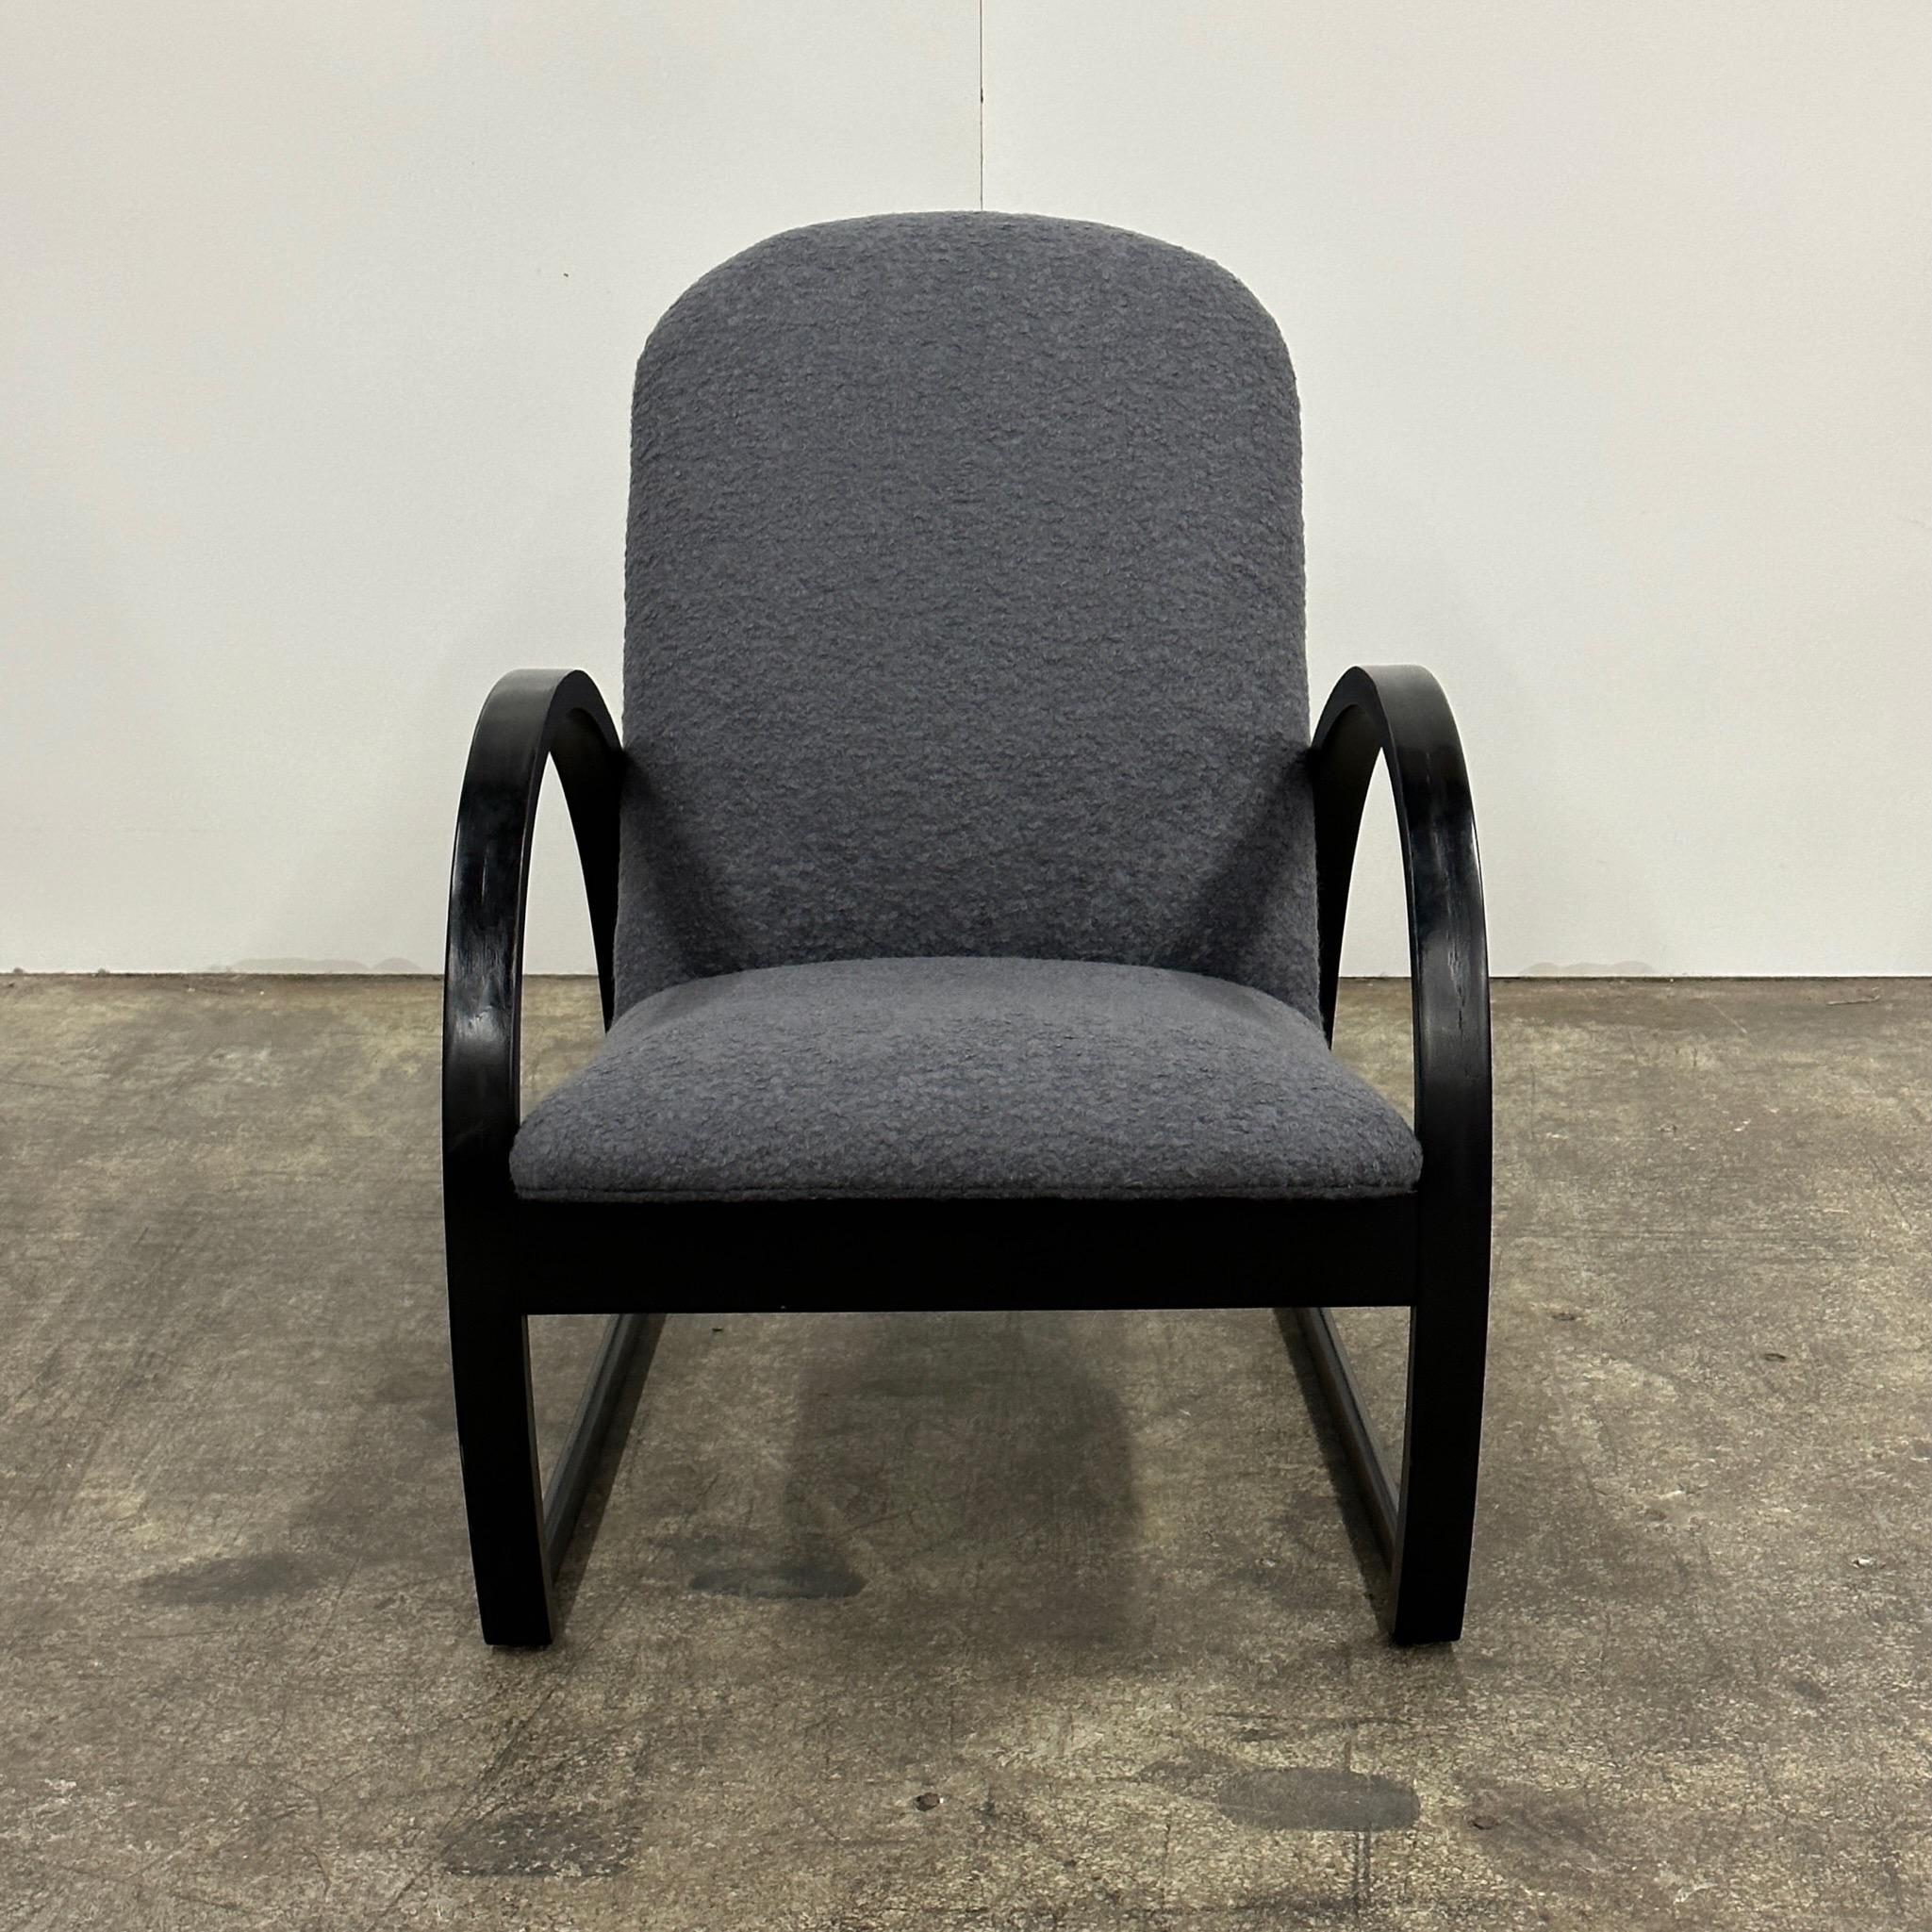 Lazy Spiral Chair by Peter Danko In Good Condition For Sale In Chicago, IL